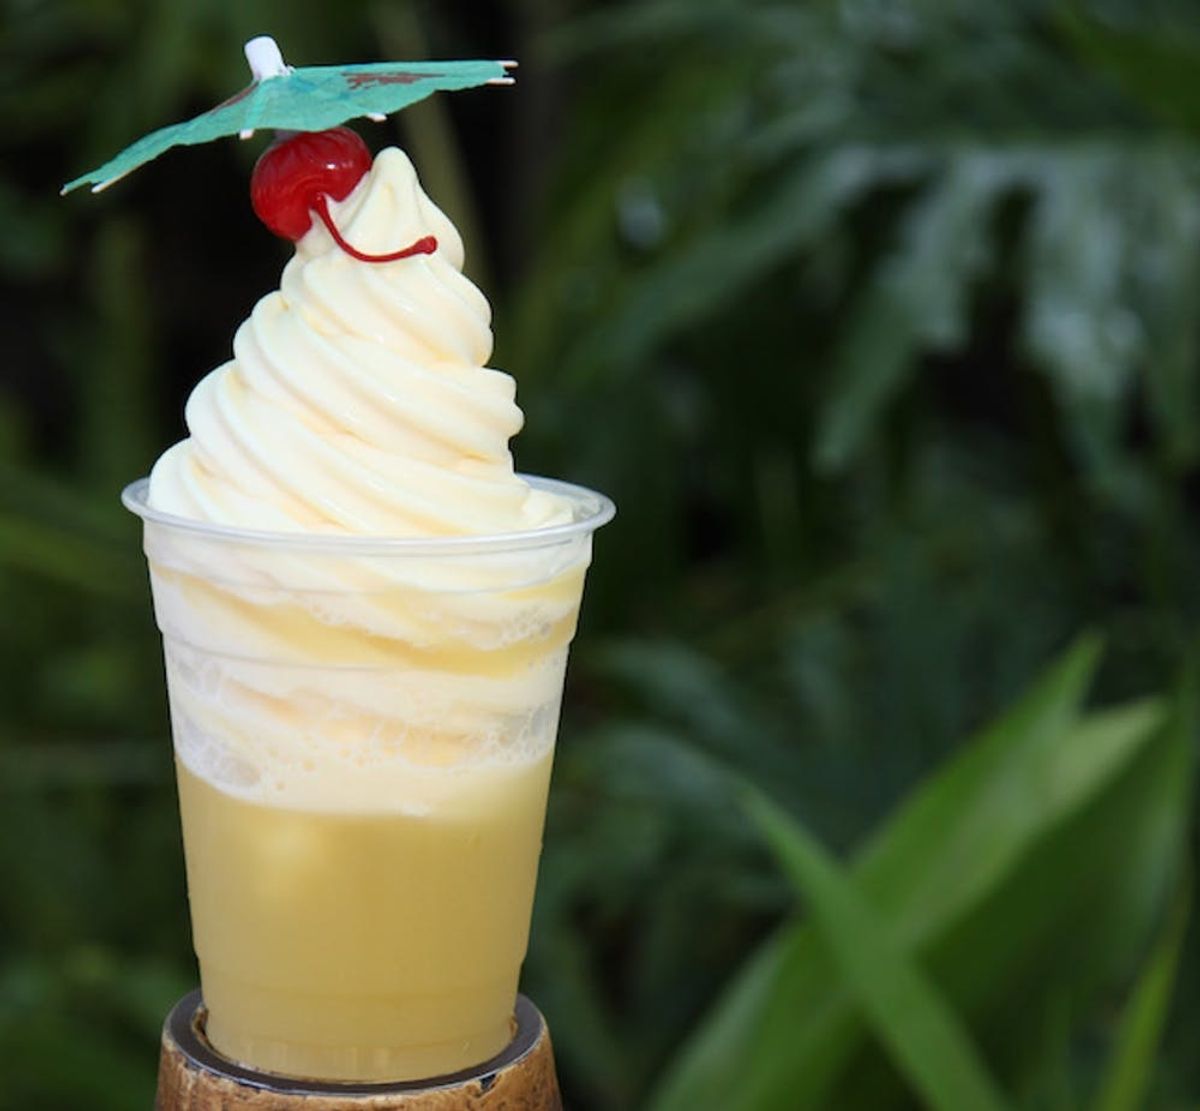 15 Delicious Disneyland Dishes You Can Make at Home